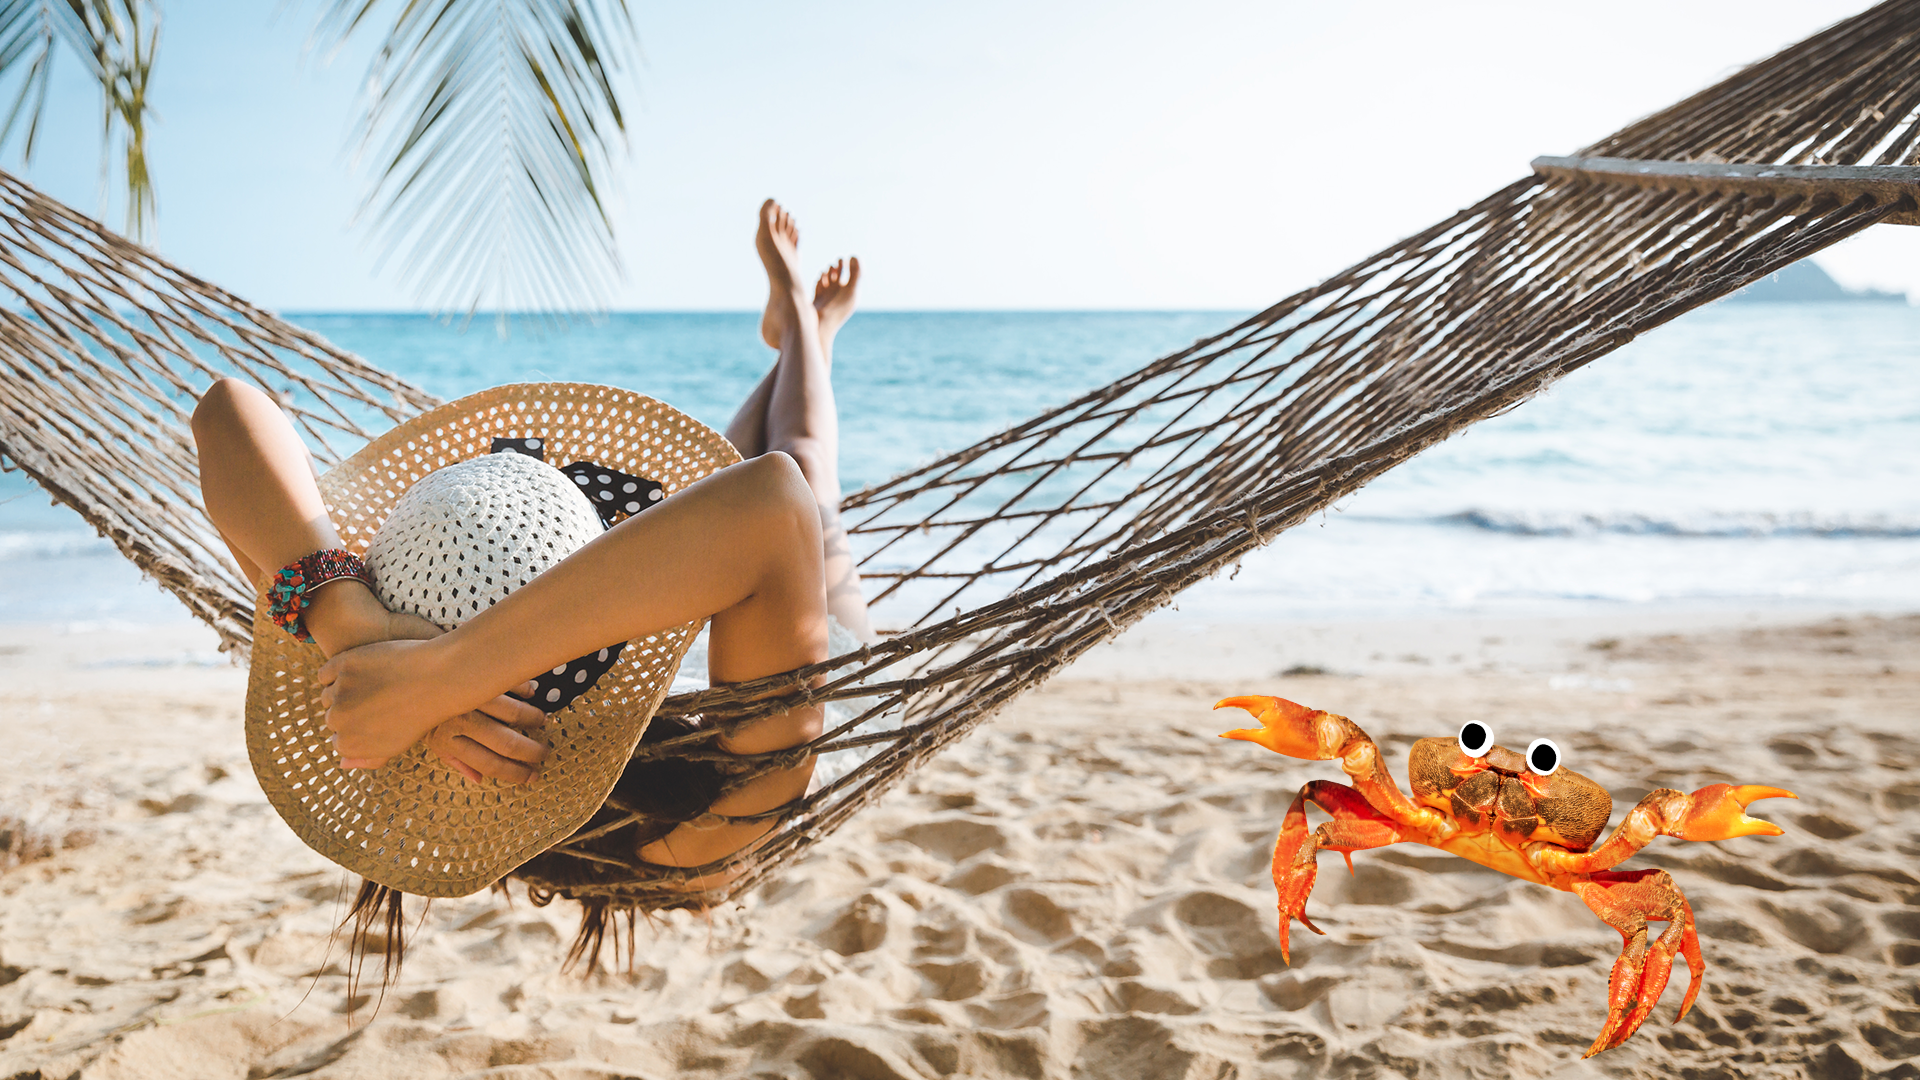 A woman relaxes on a hammock on the beach, while an alarmingly large crab looks on